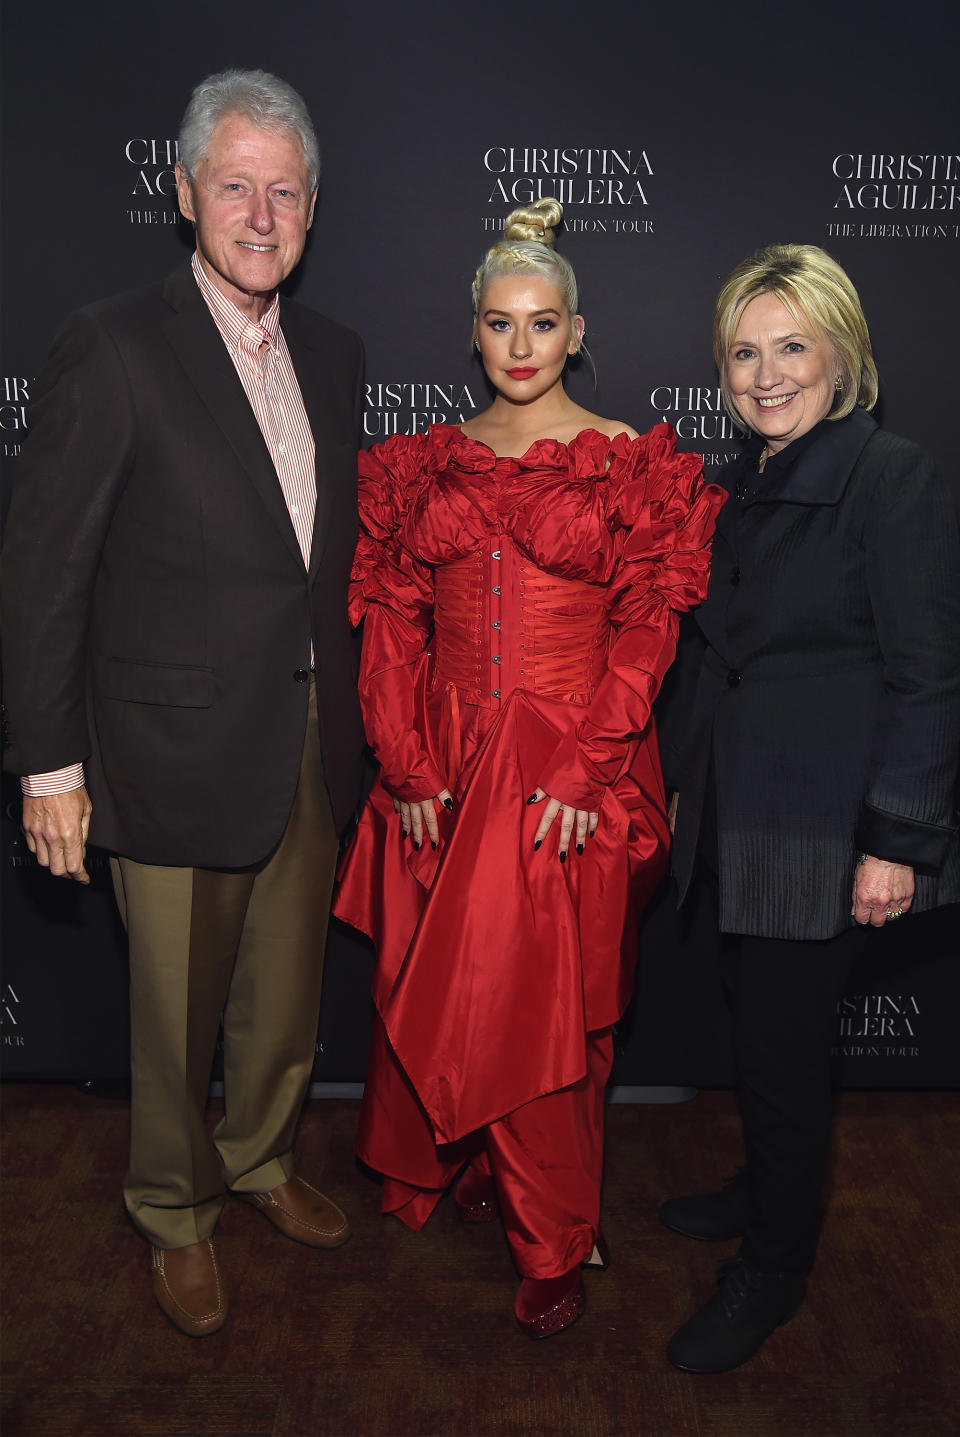 Another backstage shot of the Clintons and Aguilera at Radio City Music Hall. (Photo: Kevin Mazur/Getty Images for Live Nation)